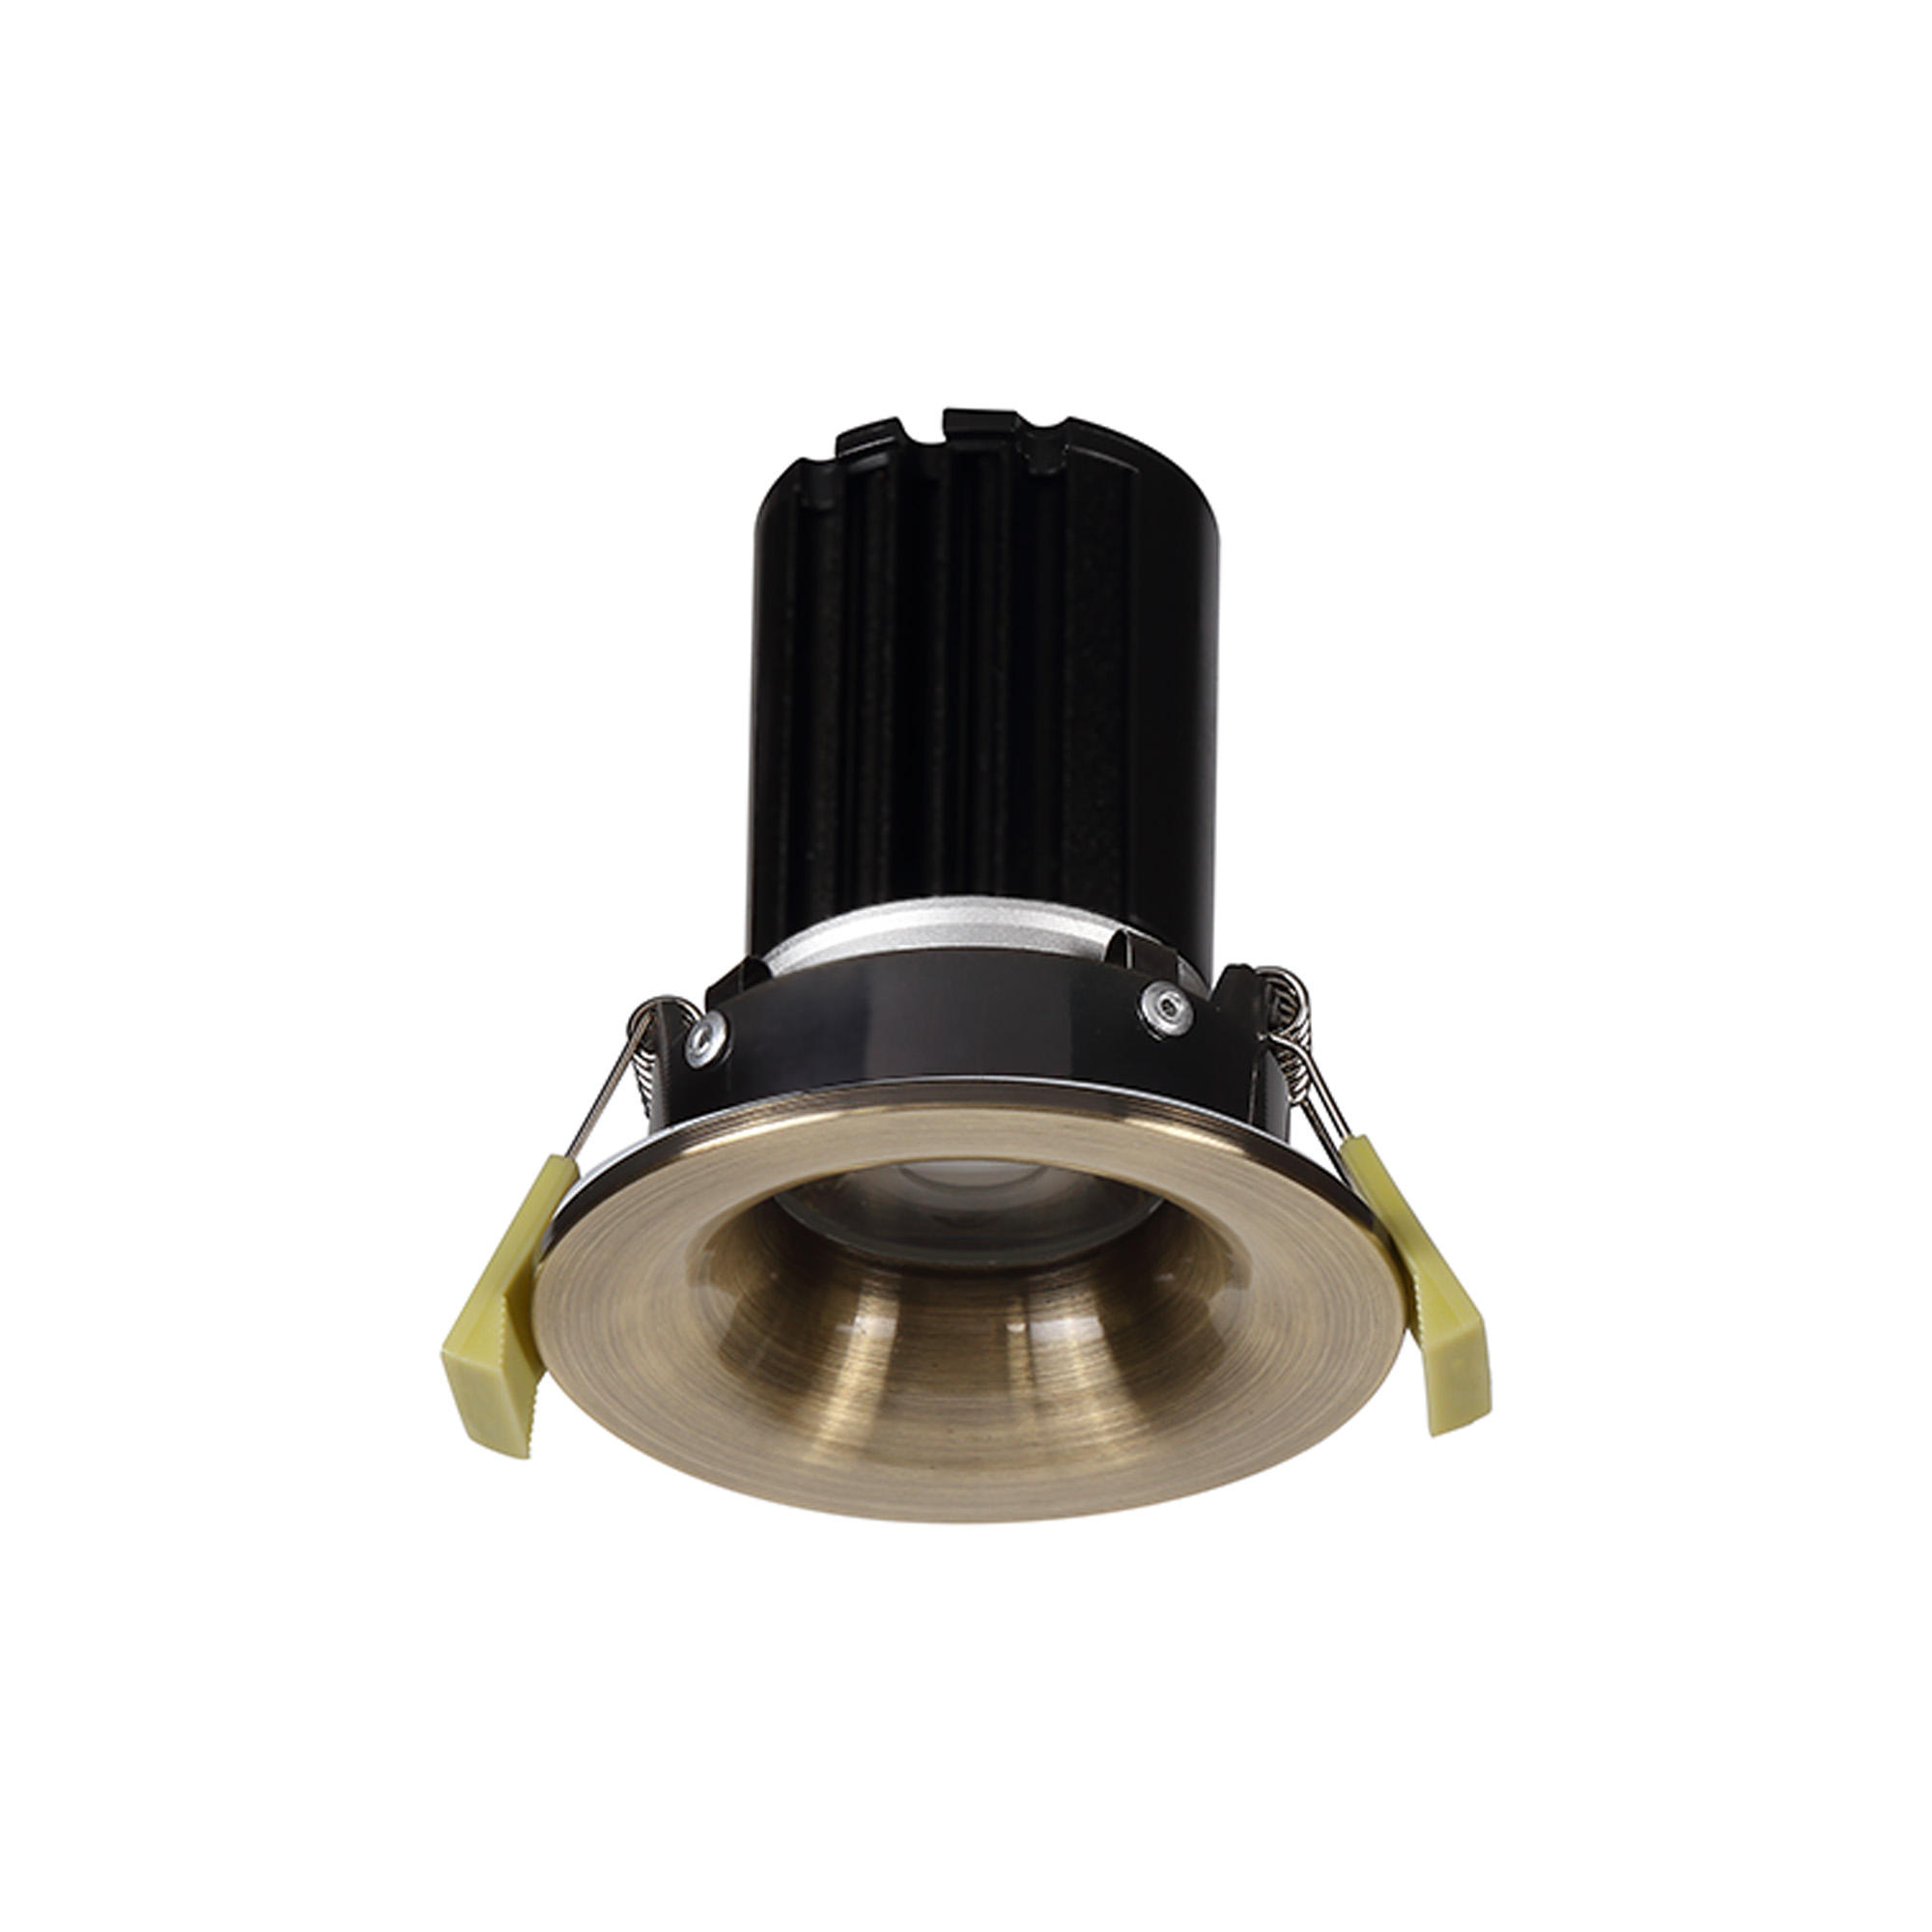 DM201480  Bruve 9 Tridonic powered 9W 2700K 700lm 24° LED Engine,250mA , CRI>90 LED Engine  Antique Brass Fixed Round Recessed Downlight, Inner Glass cover, IP65